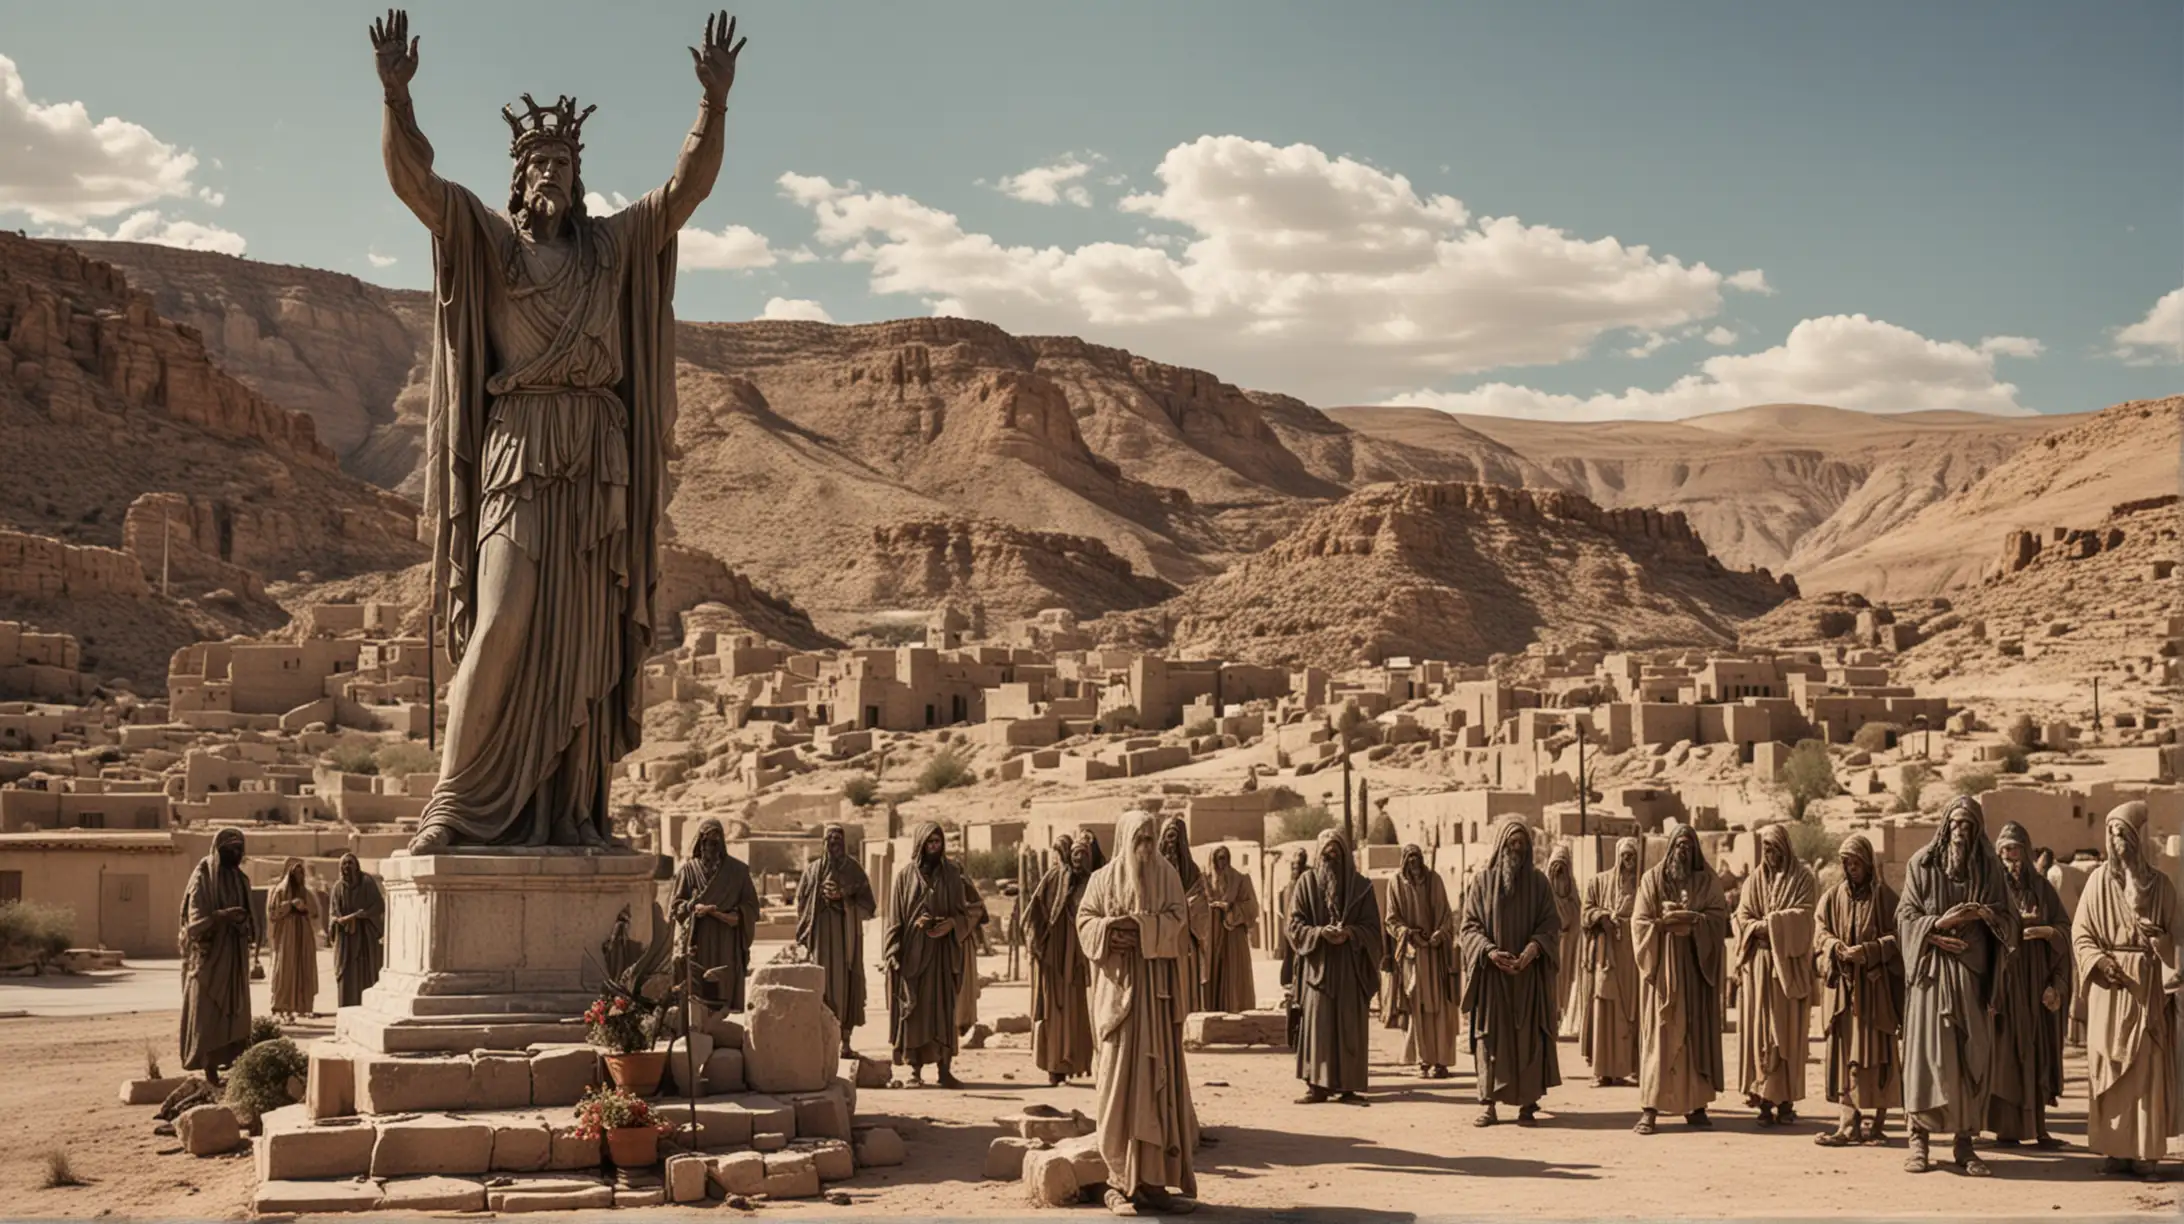  a pagan statue in a large desert town setting with some people gathered around it. during the era Biblical era of Elijah.